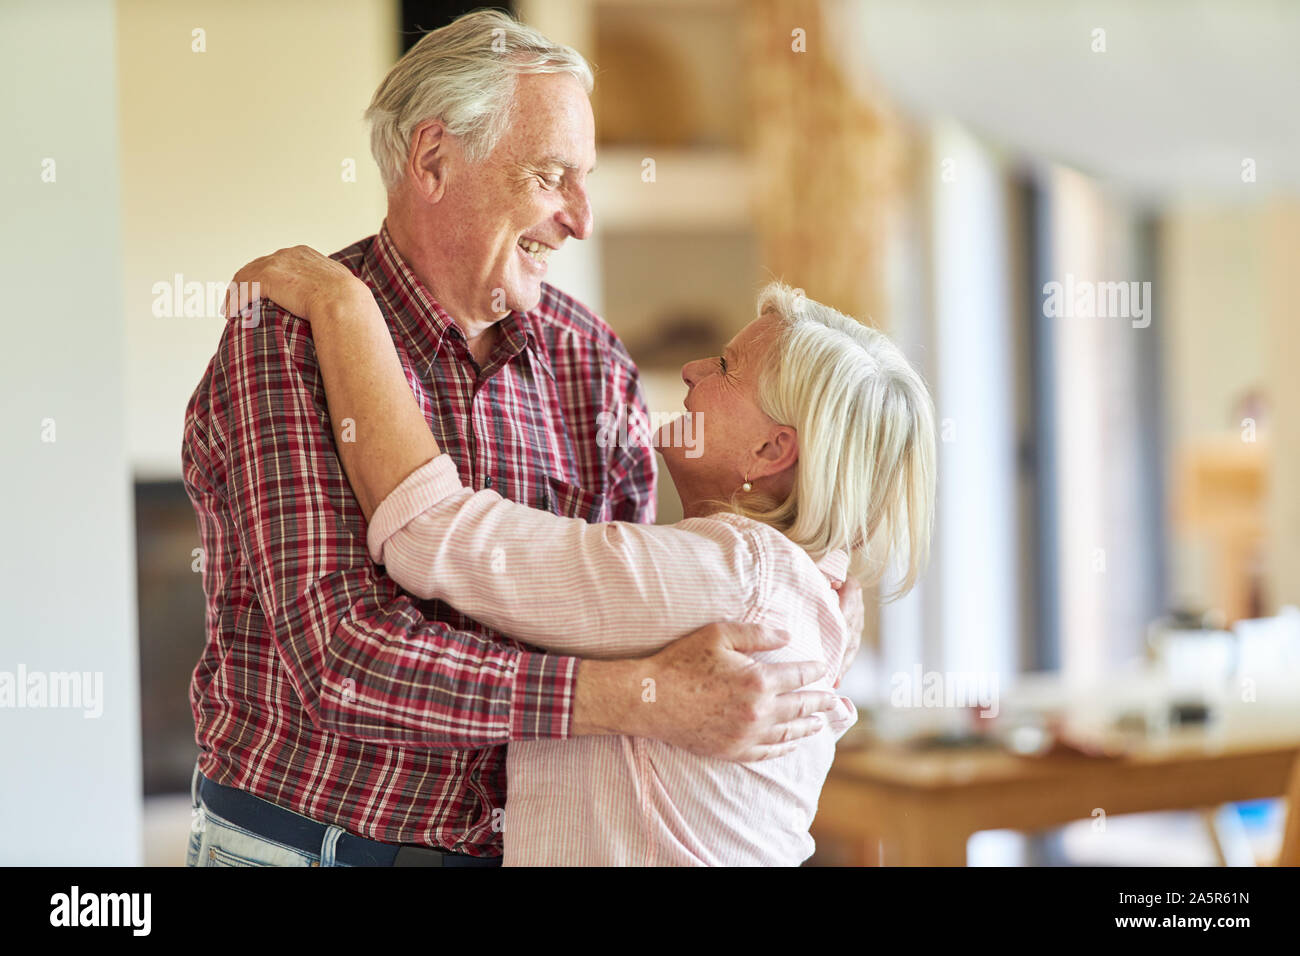 Senior couple smilingly welcomes each other while meeting or getting to know each other Stock Photo